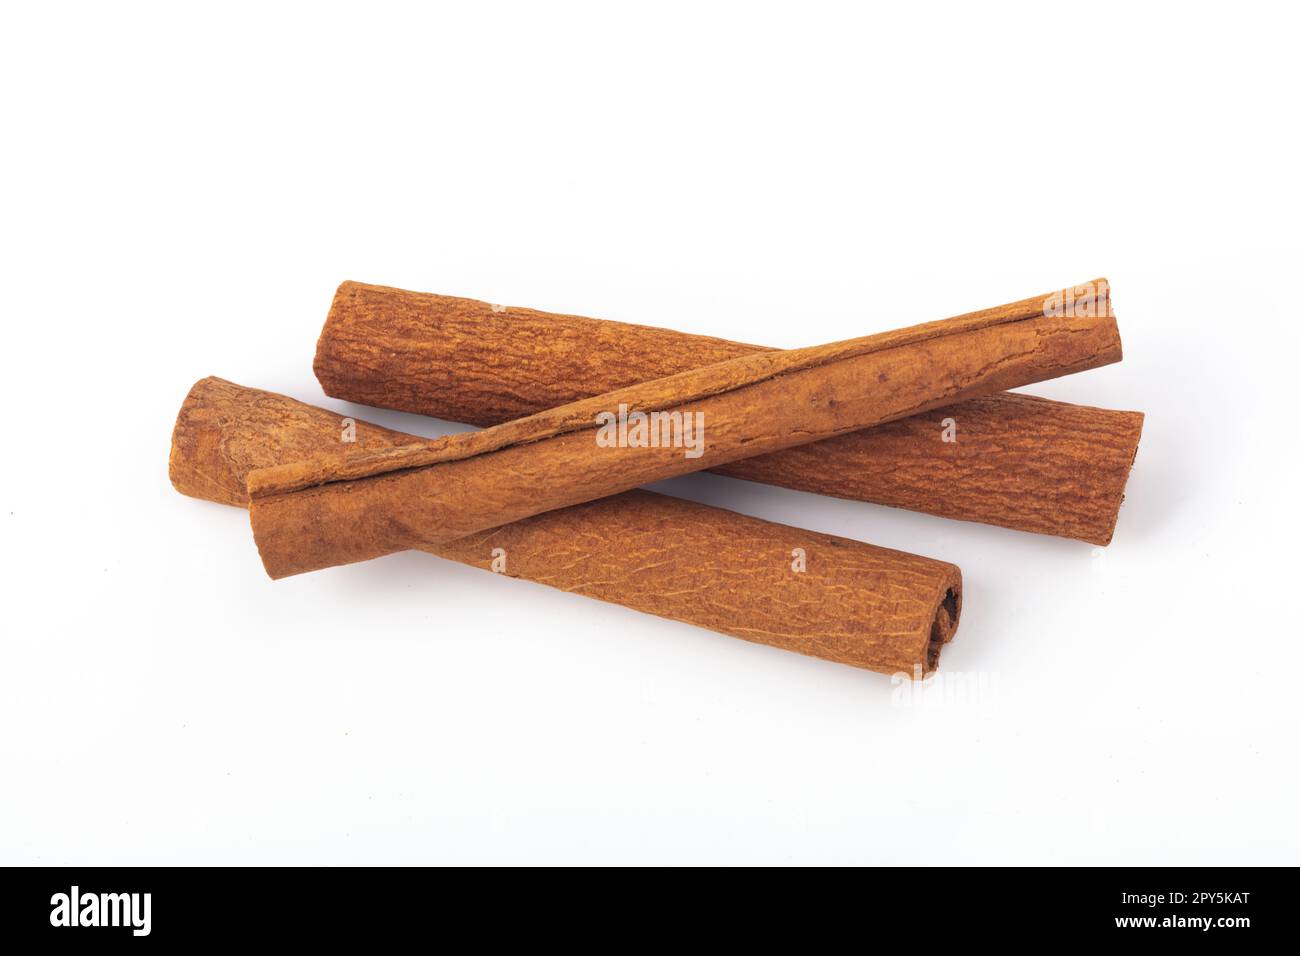 Dried Cinnamon sticks isolated over white background Stock Photo